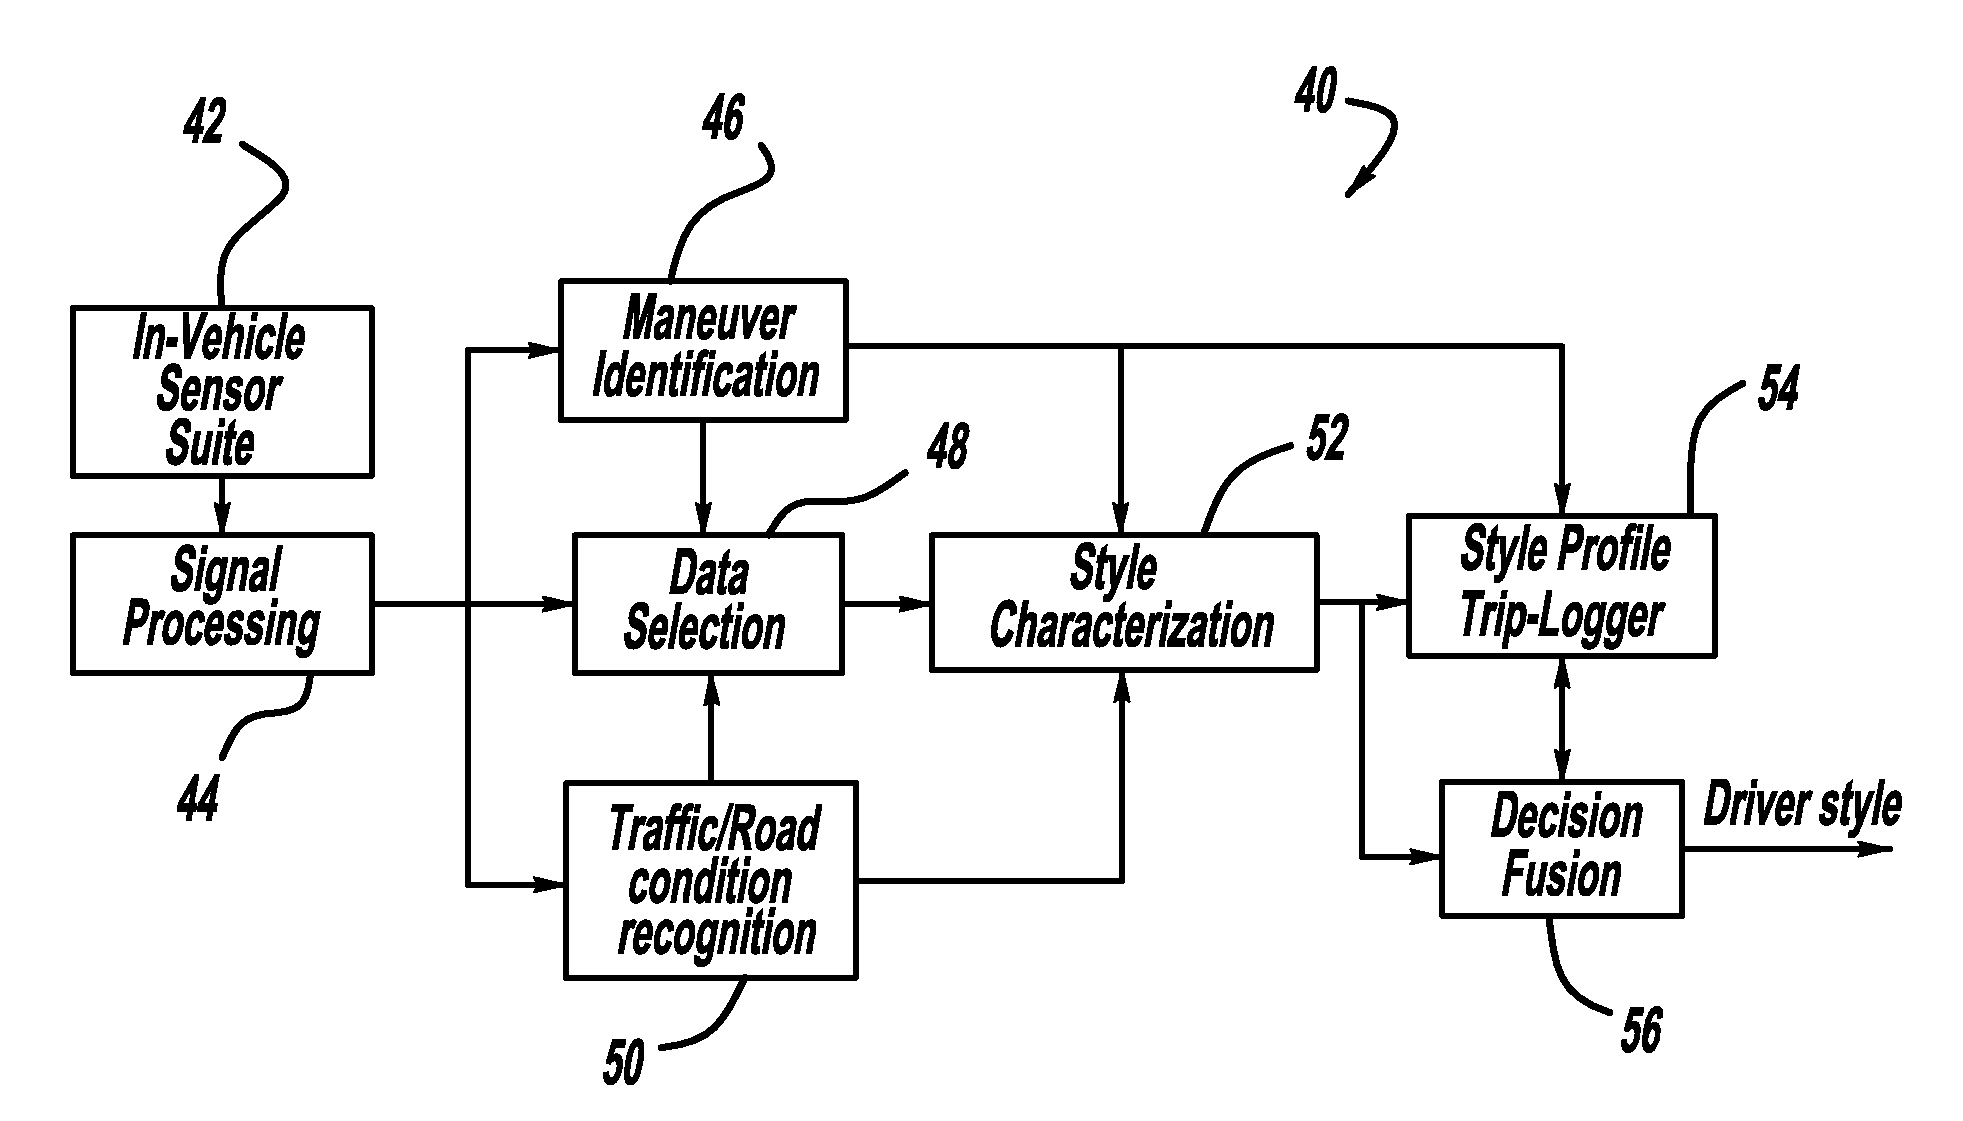 Adaptive vehicle control system with driving style recognition based on vehicle left/right turns